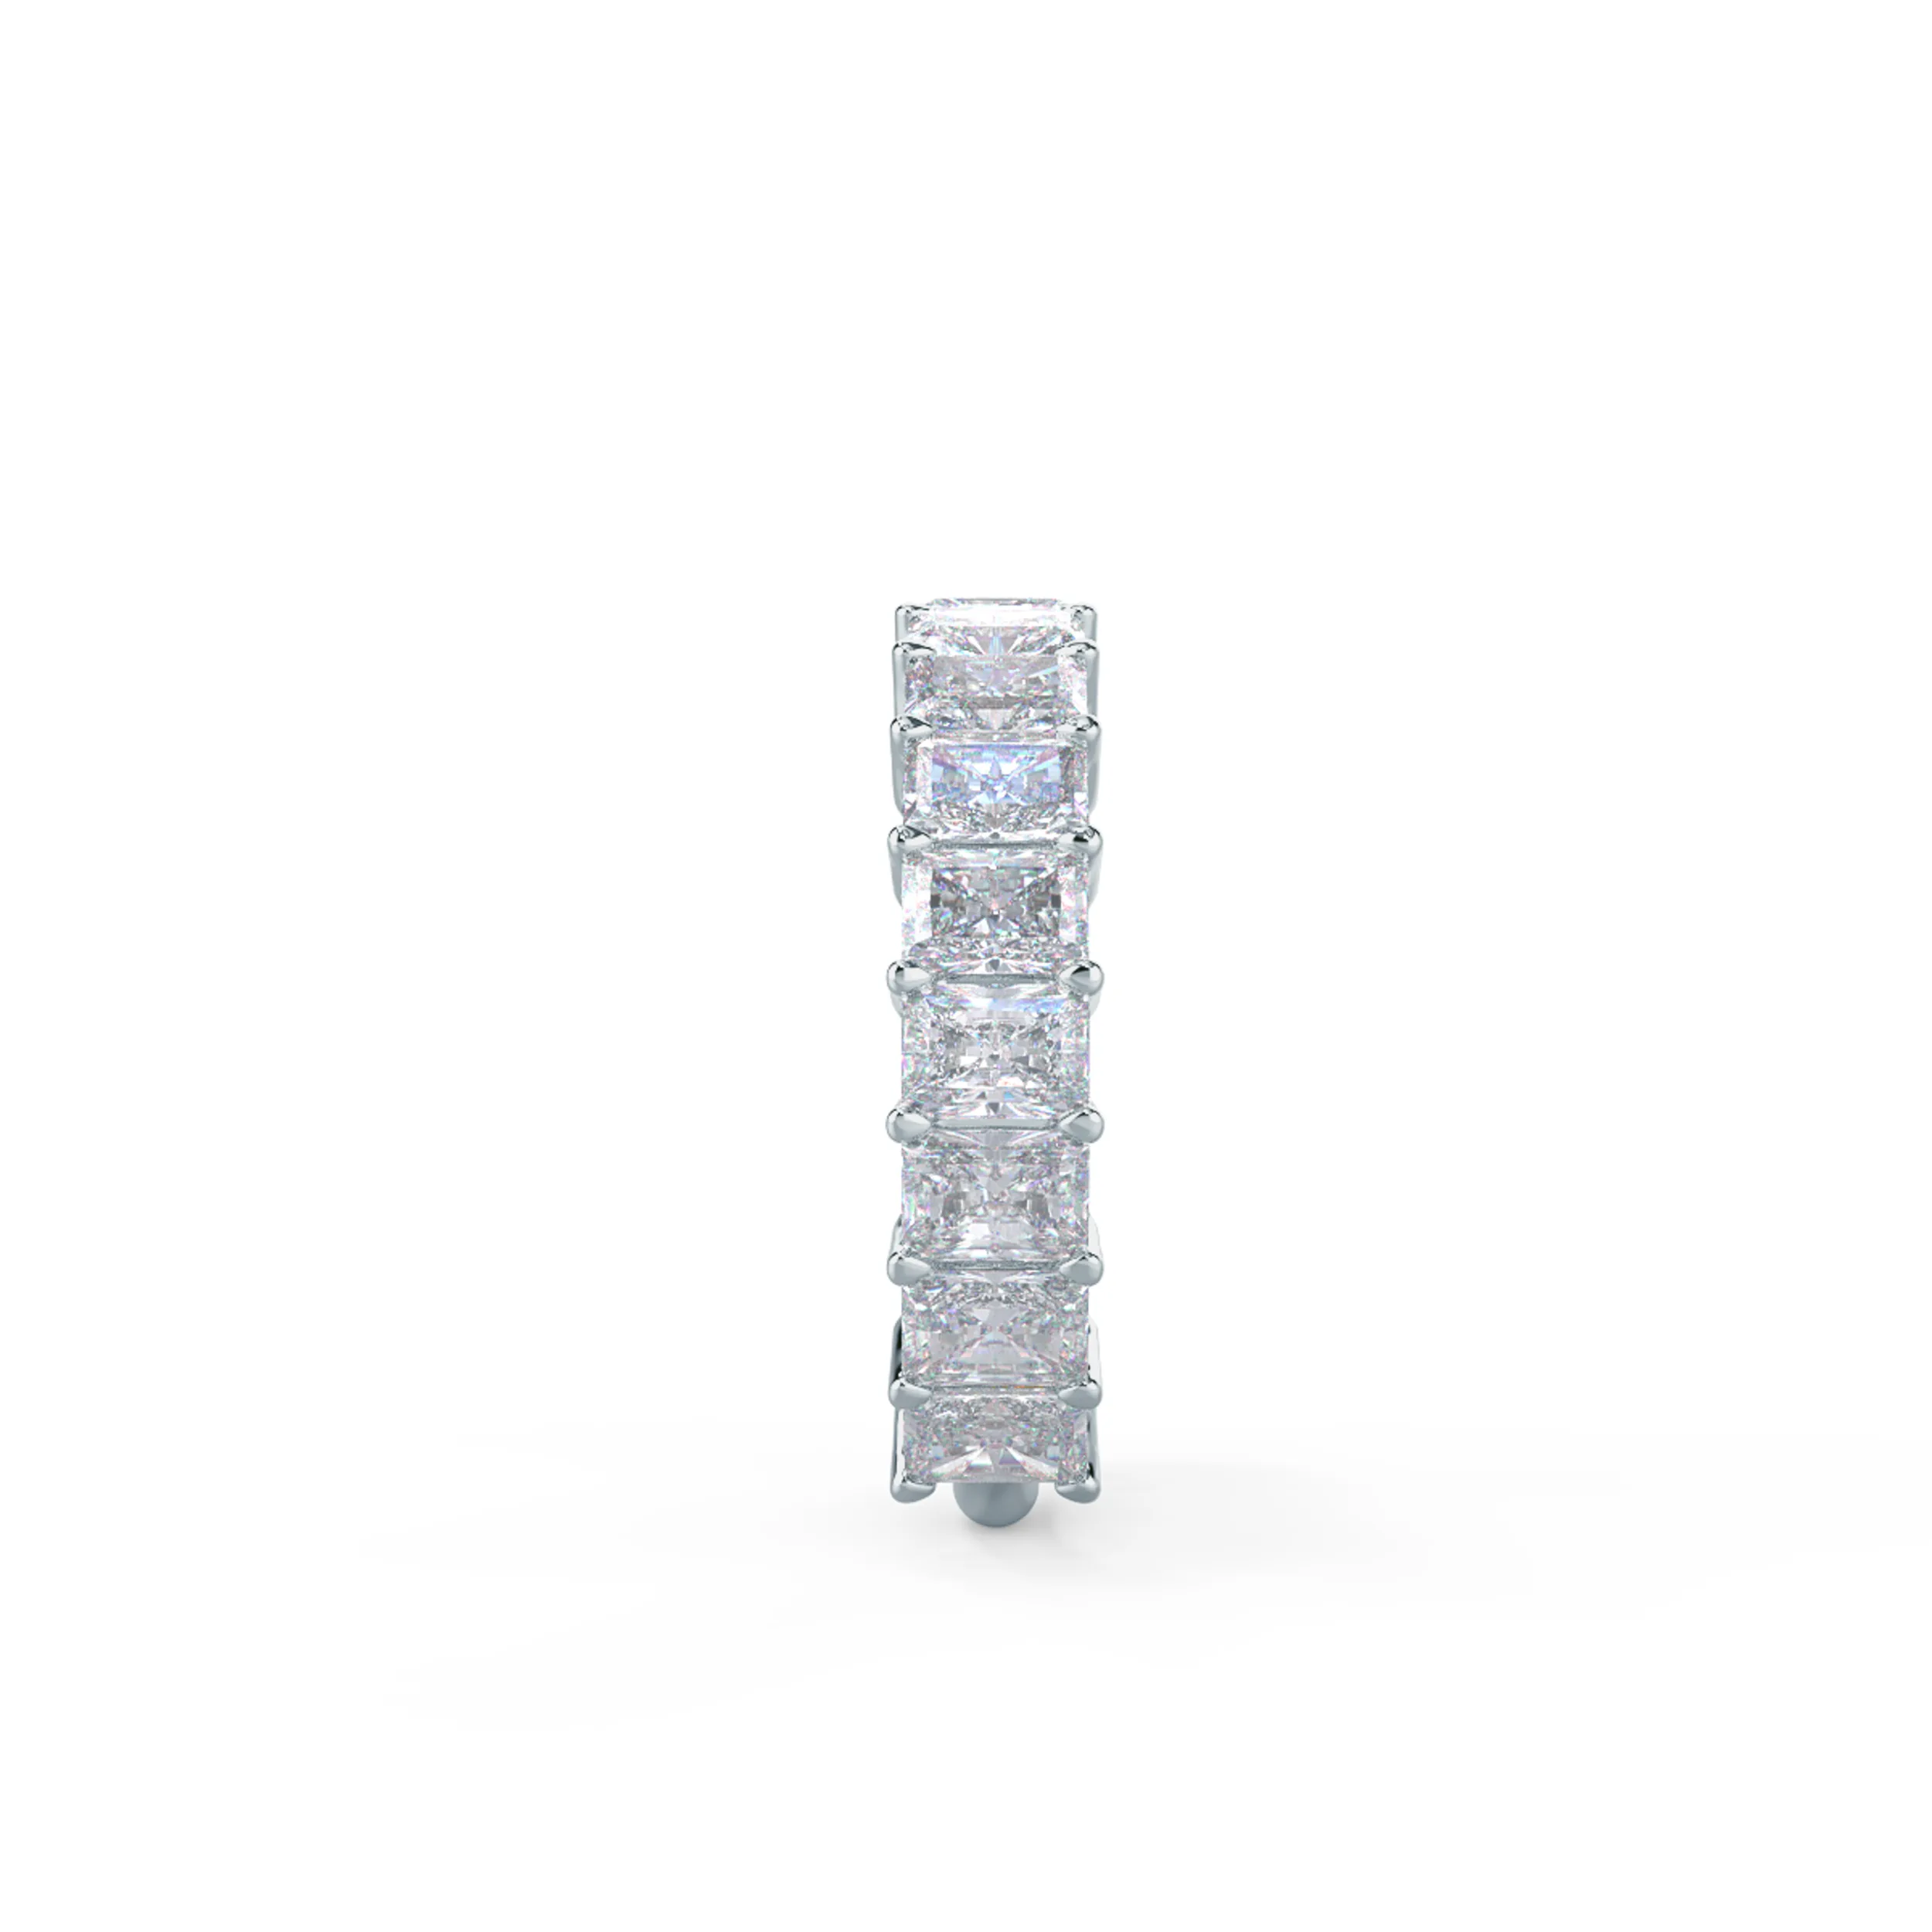 18k White Gold Radiant Three Quarter Band featuring 3.5 Carat Diamonds (Side View)